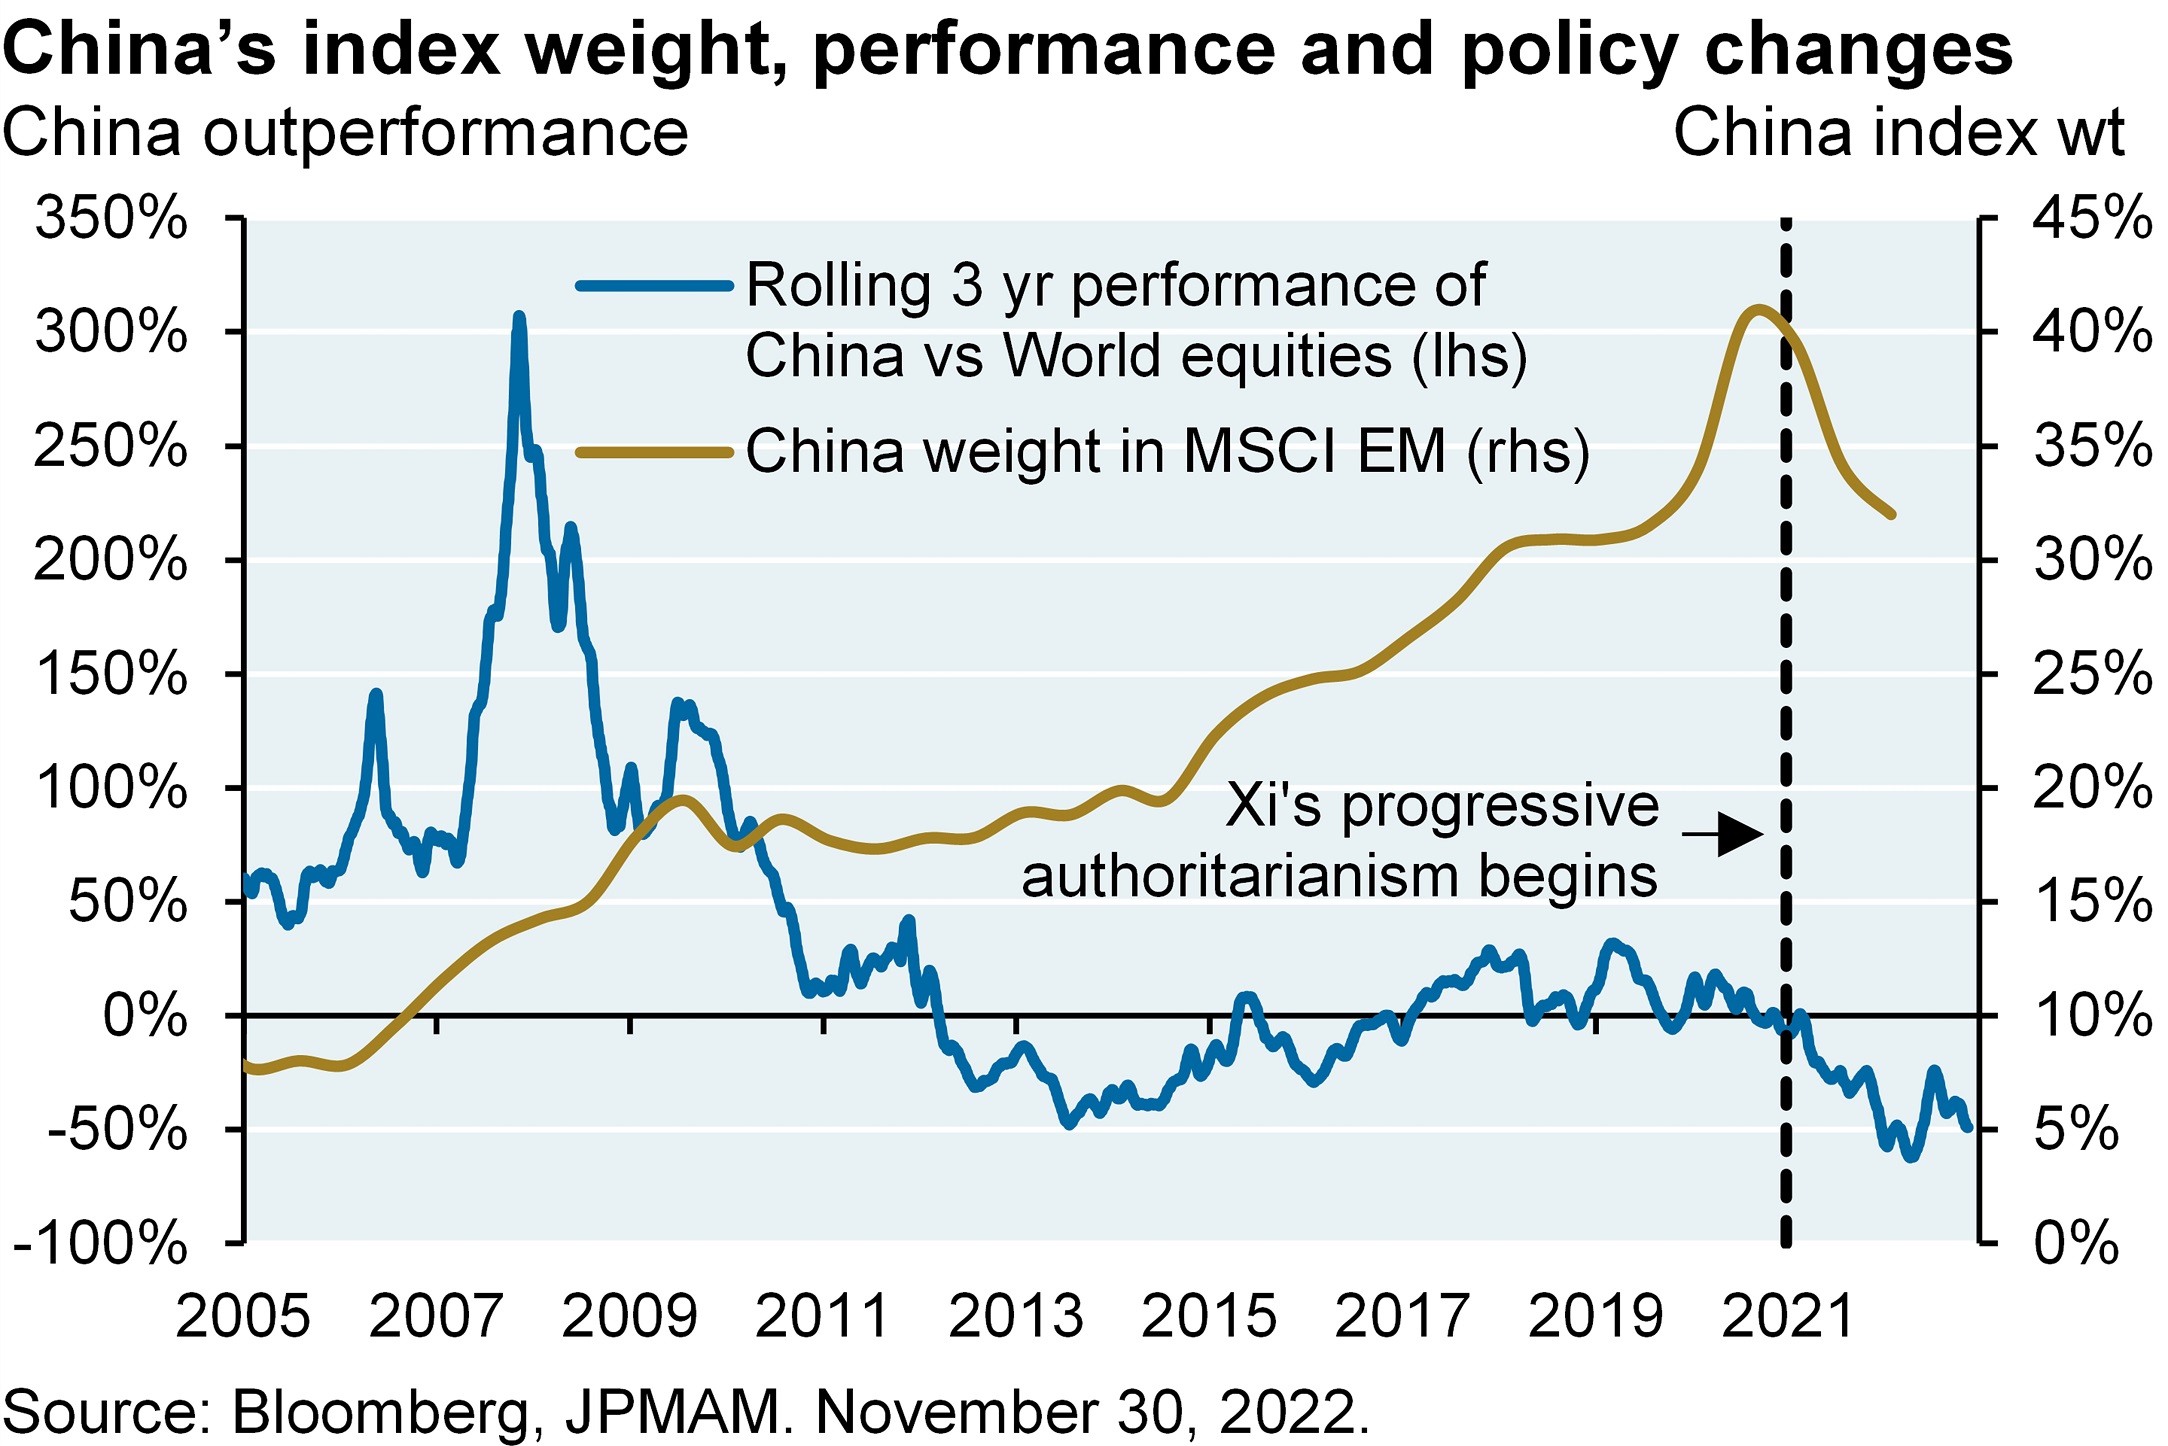 China's index weight performance and policy changes